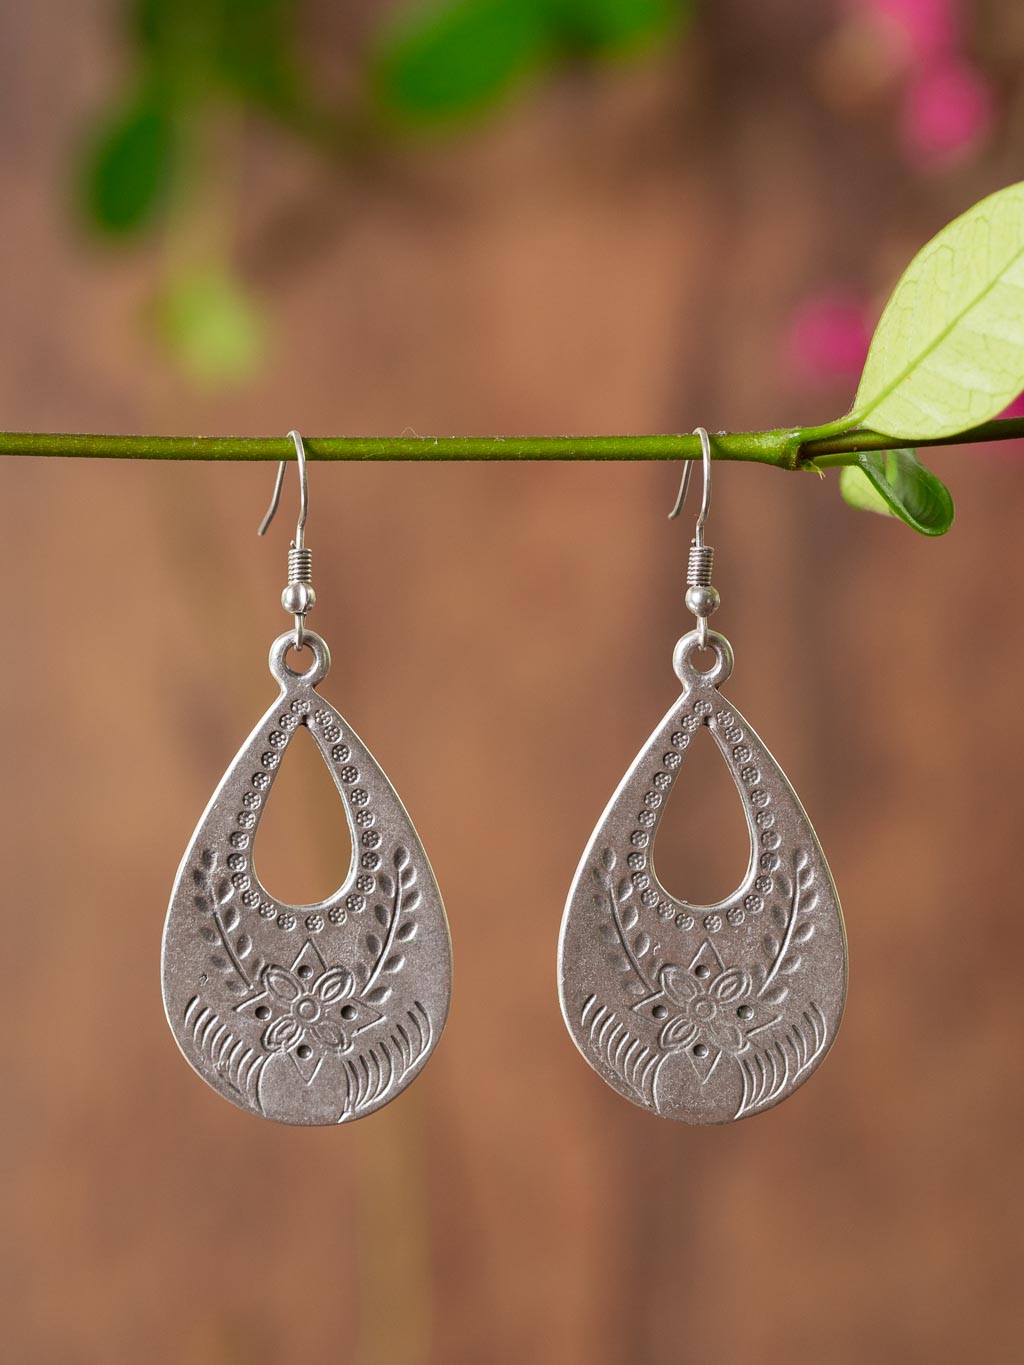 silver earring with a tear drop design and floral markings